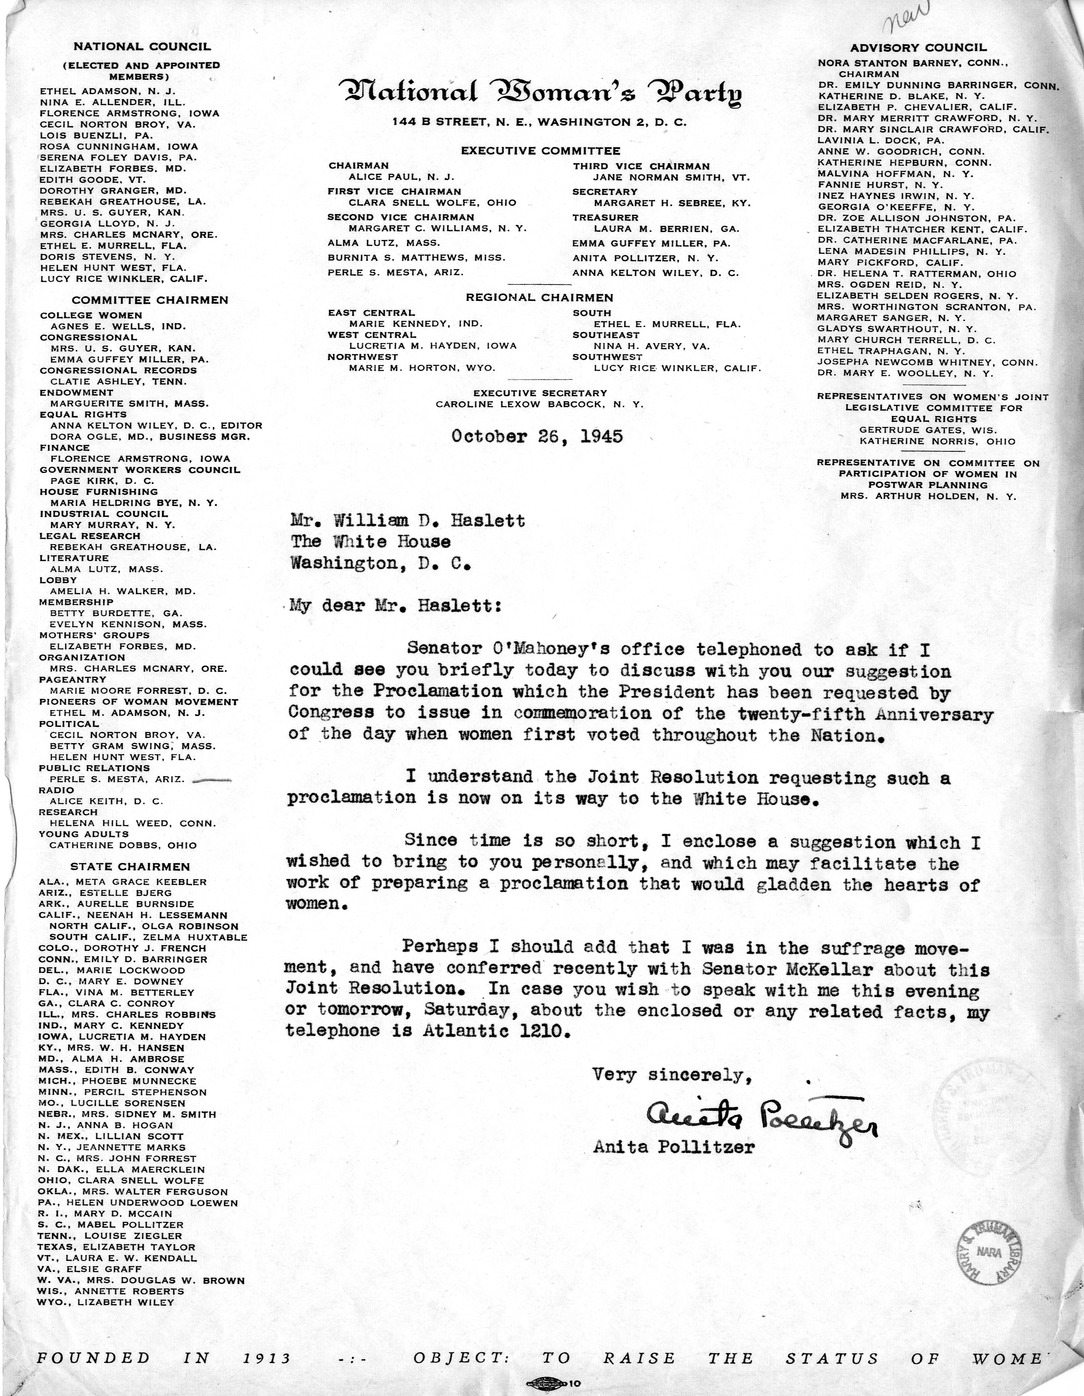 Memorandum from Frederick J. Bailey to M. C. Latta, S.J. Res. 107, Requesting the President to Proclaim November 22, 1945, as Woman's Enfranchisement Day, with Attachments